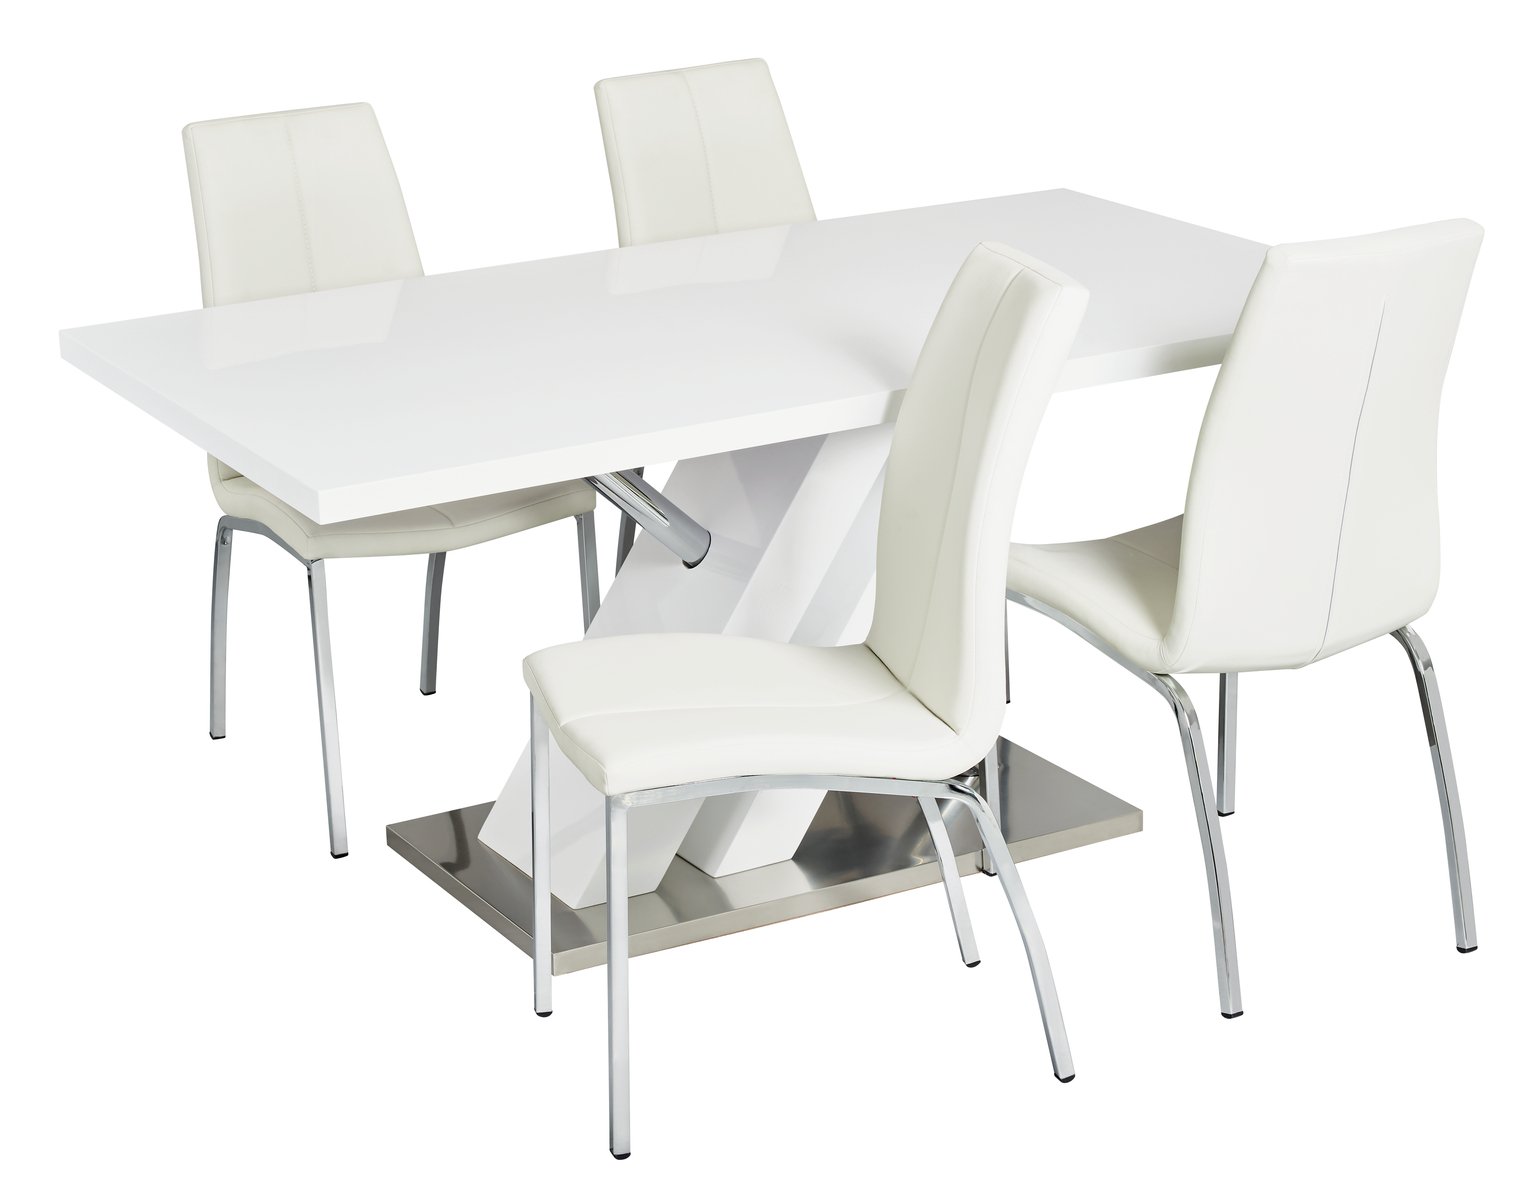 Argos Home Belvoir White Gloss Dining Table & 4 White Chairs